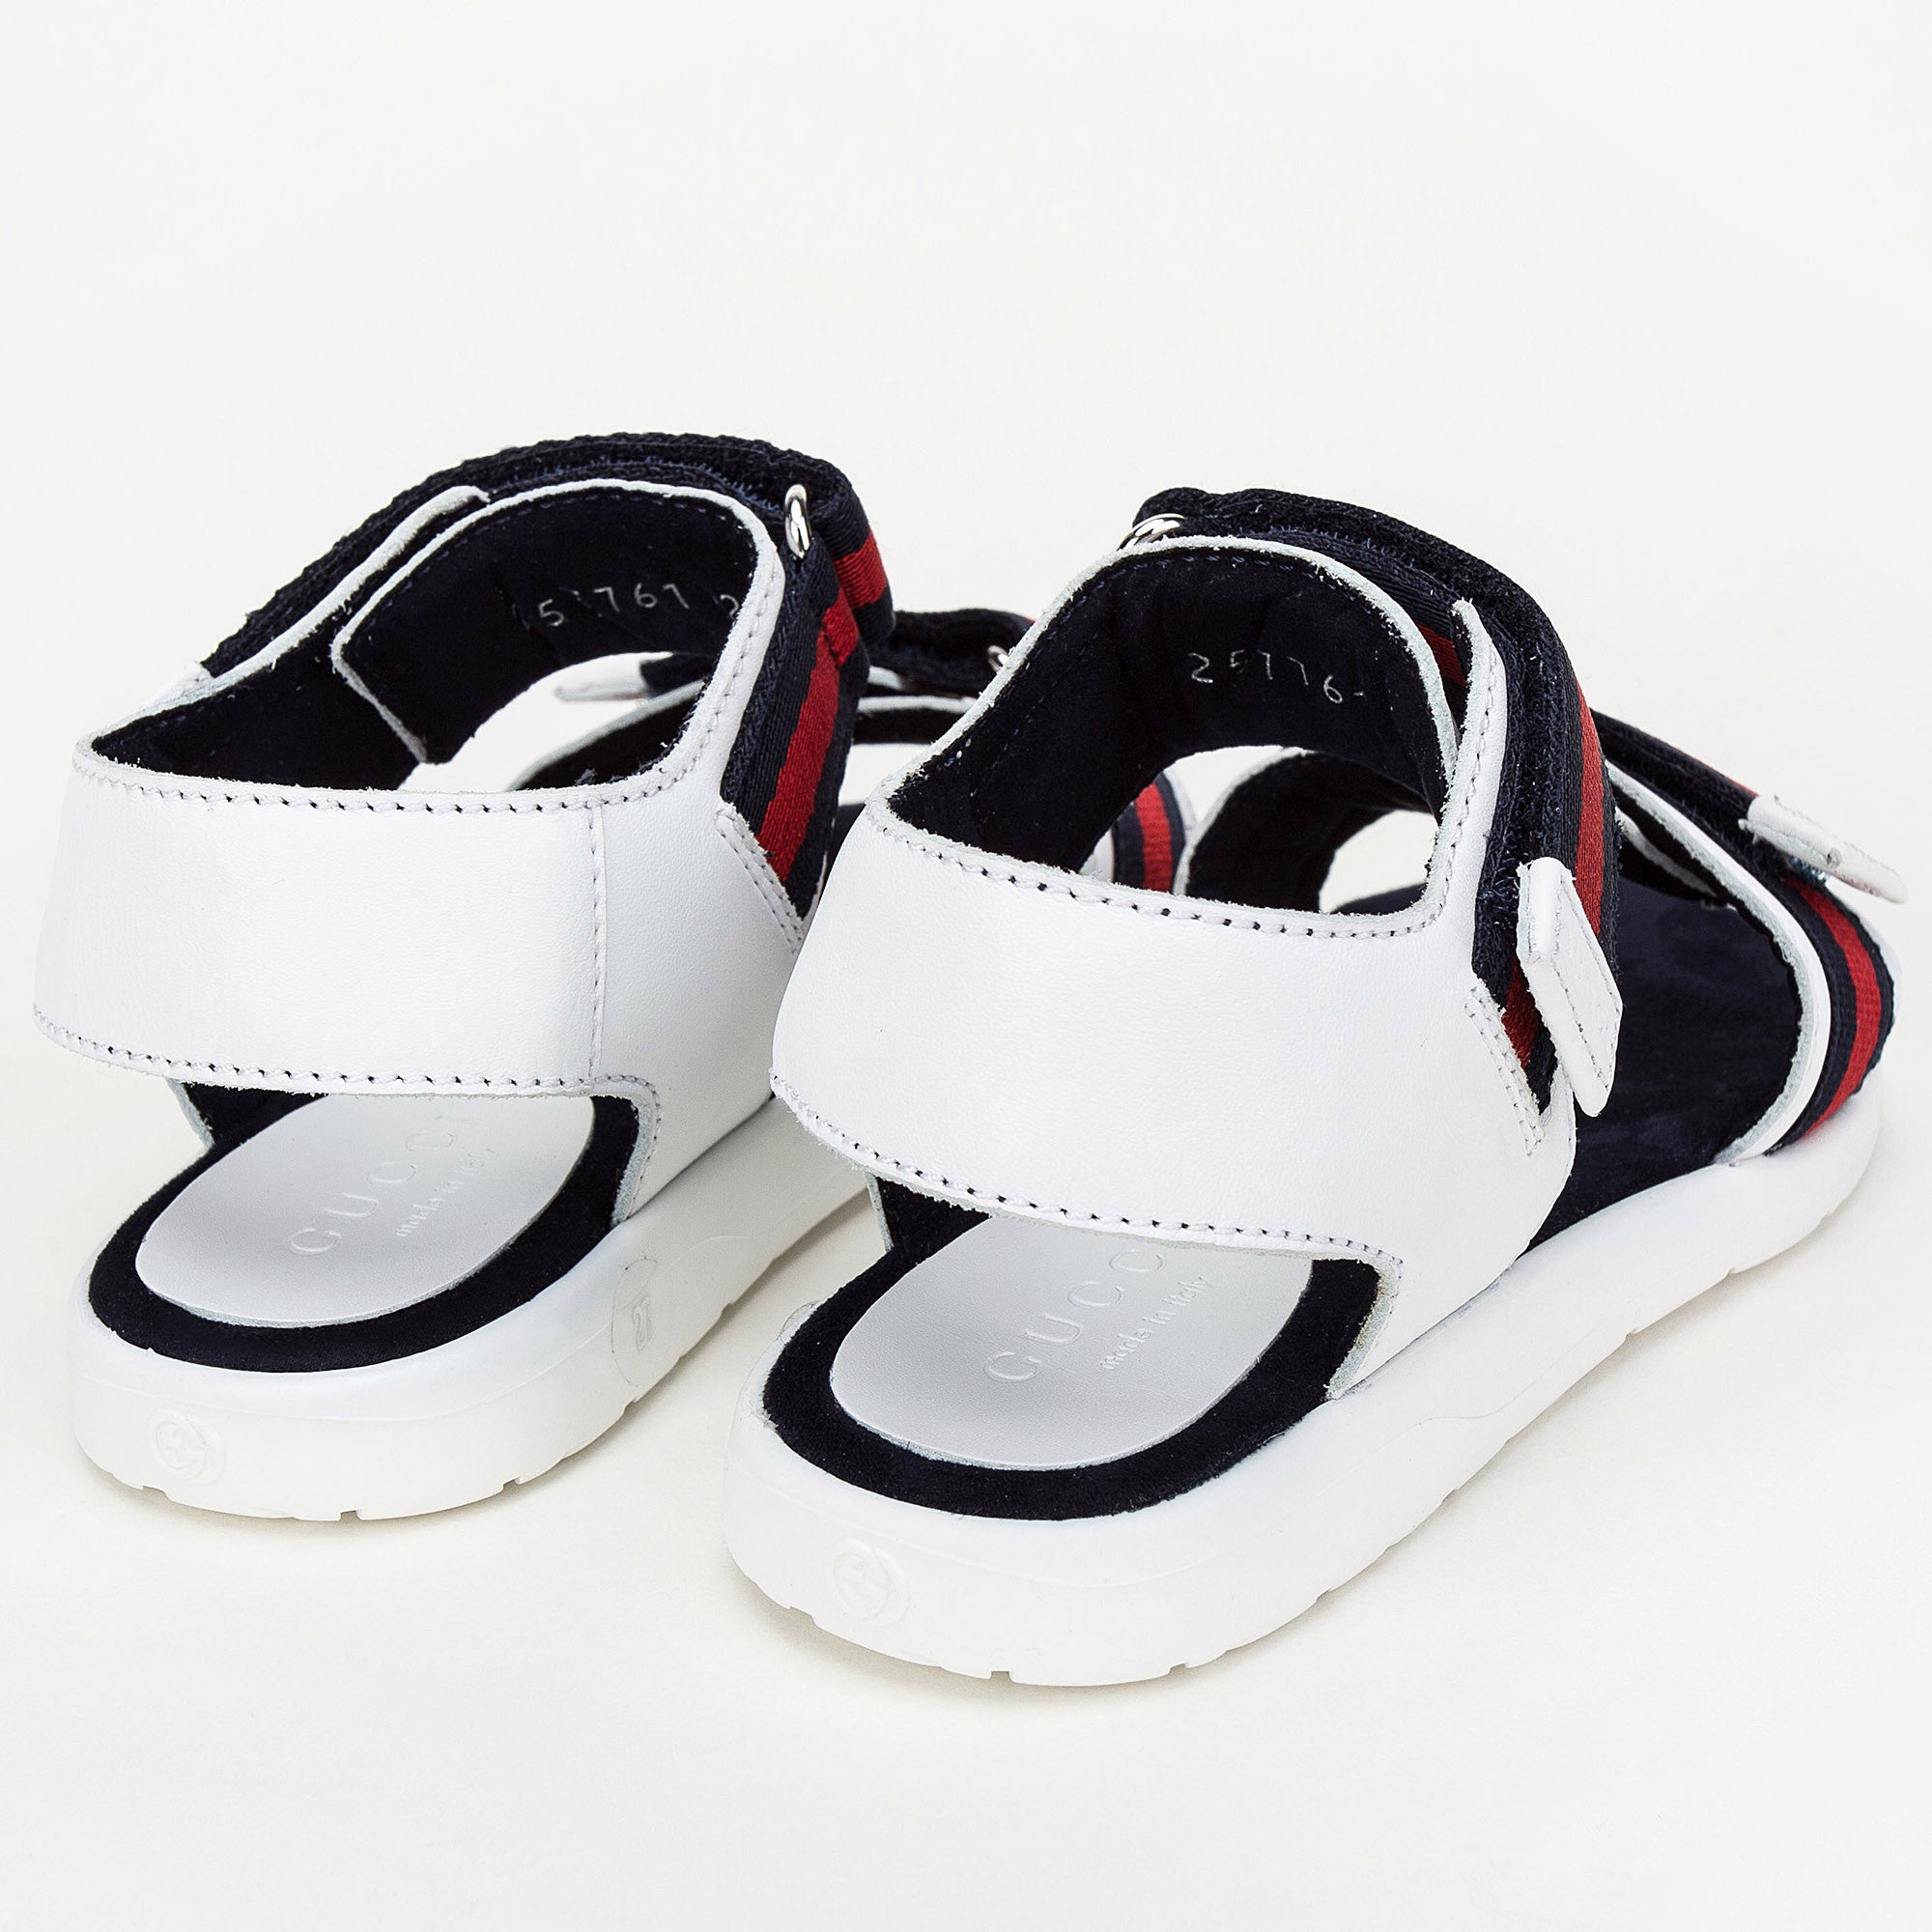 Girls White Leather Upper Rubber Sole Sandals